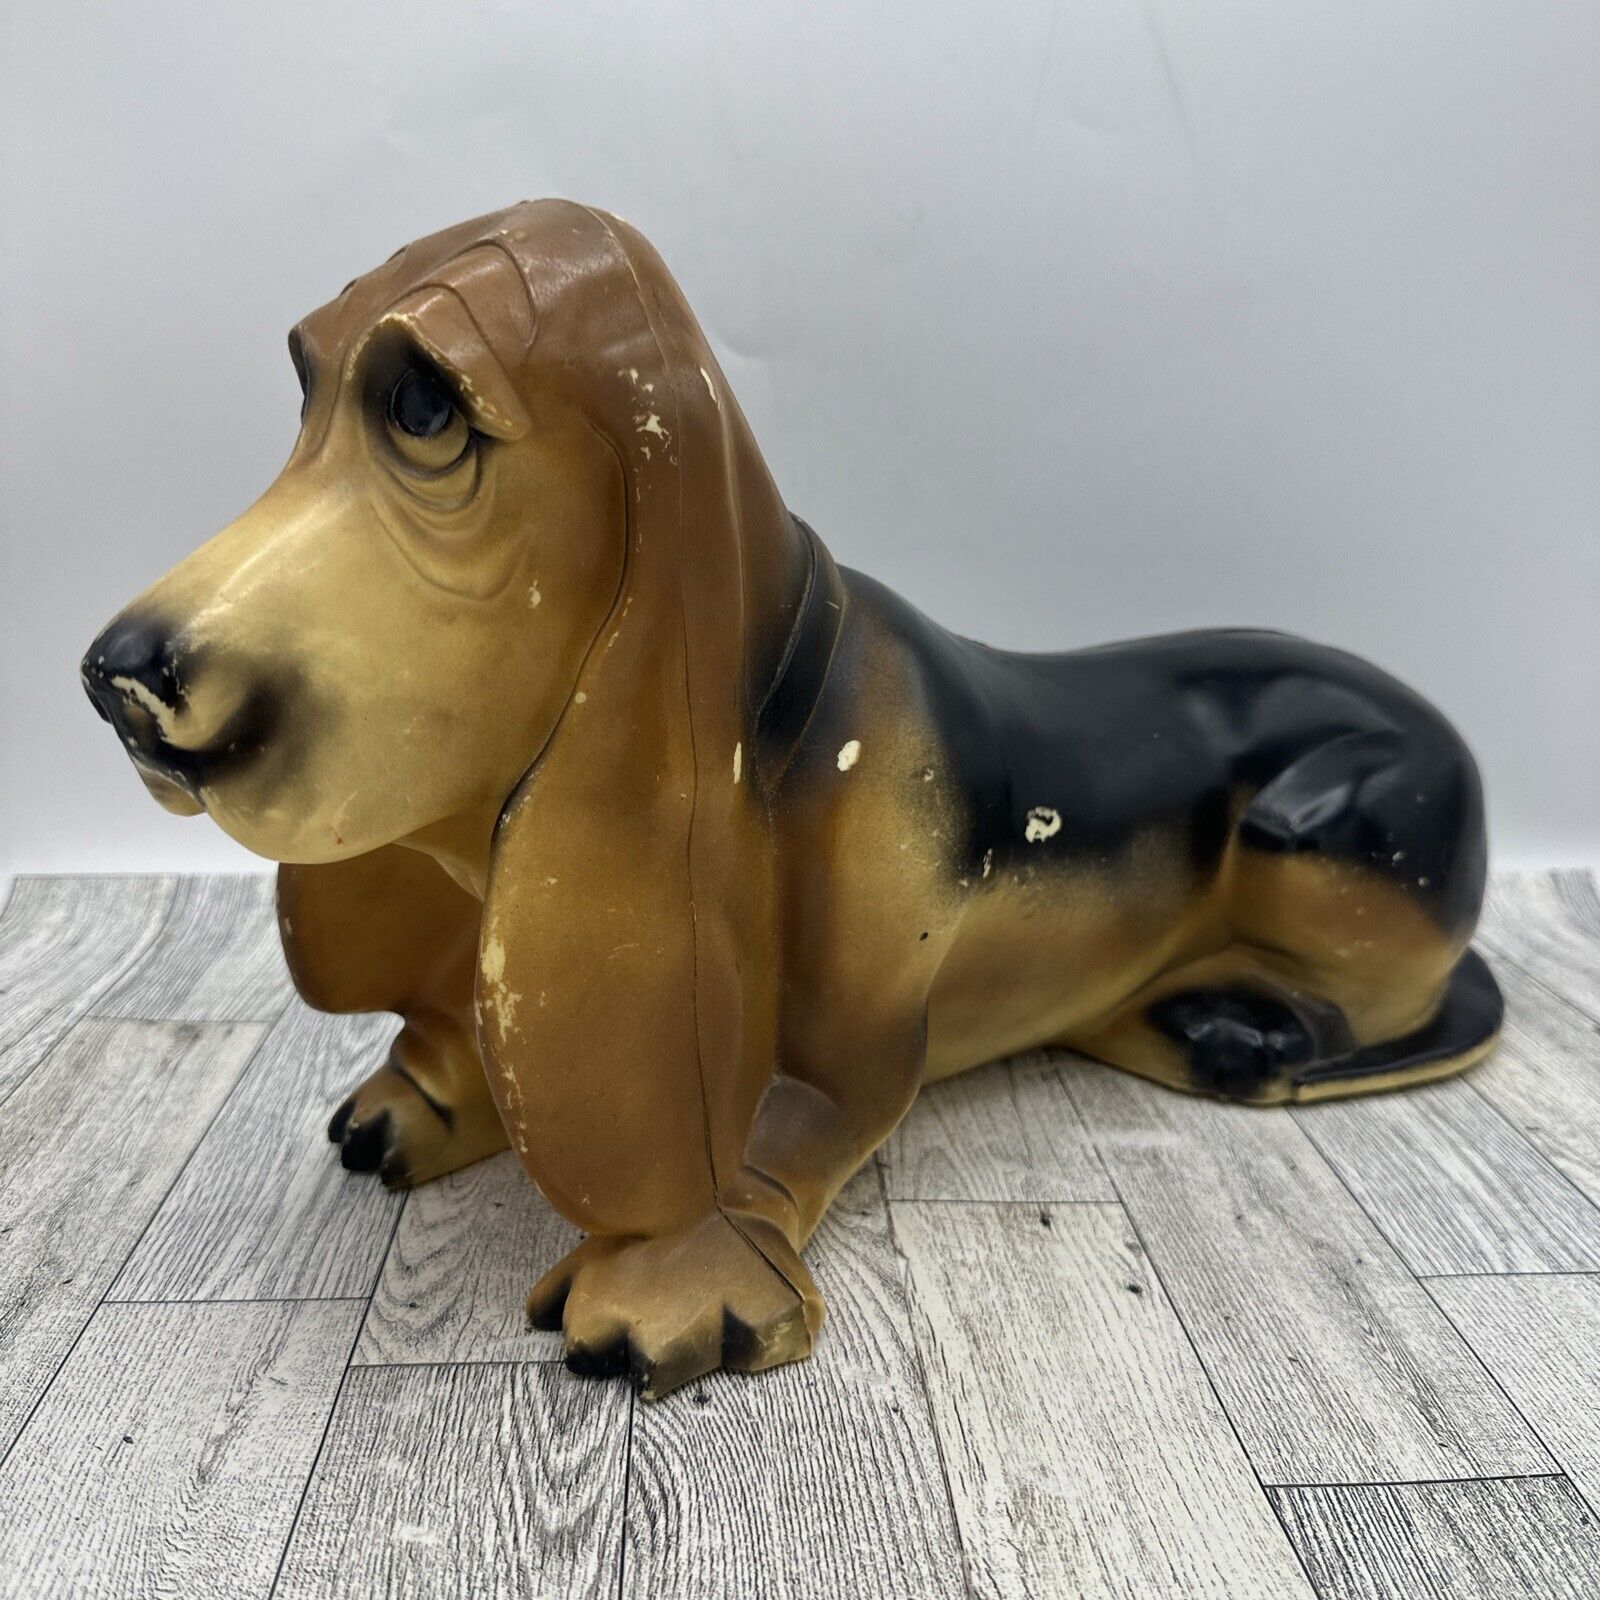 Vintage 1960s 15” BASSET HOUND Dog BLOW MOLD by Union Products Toy Plastic Art